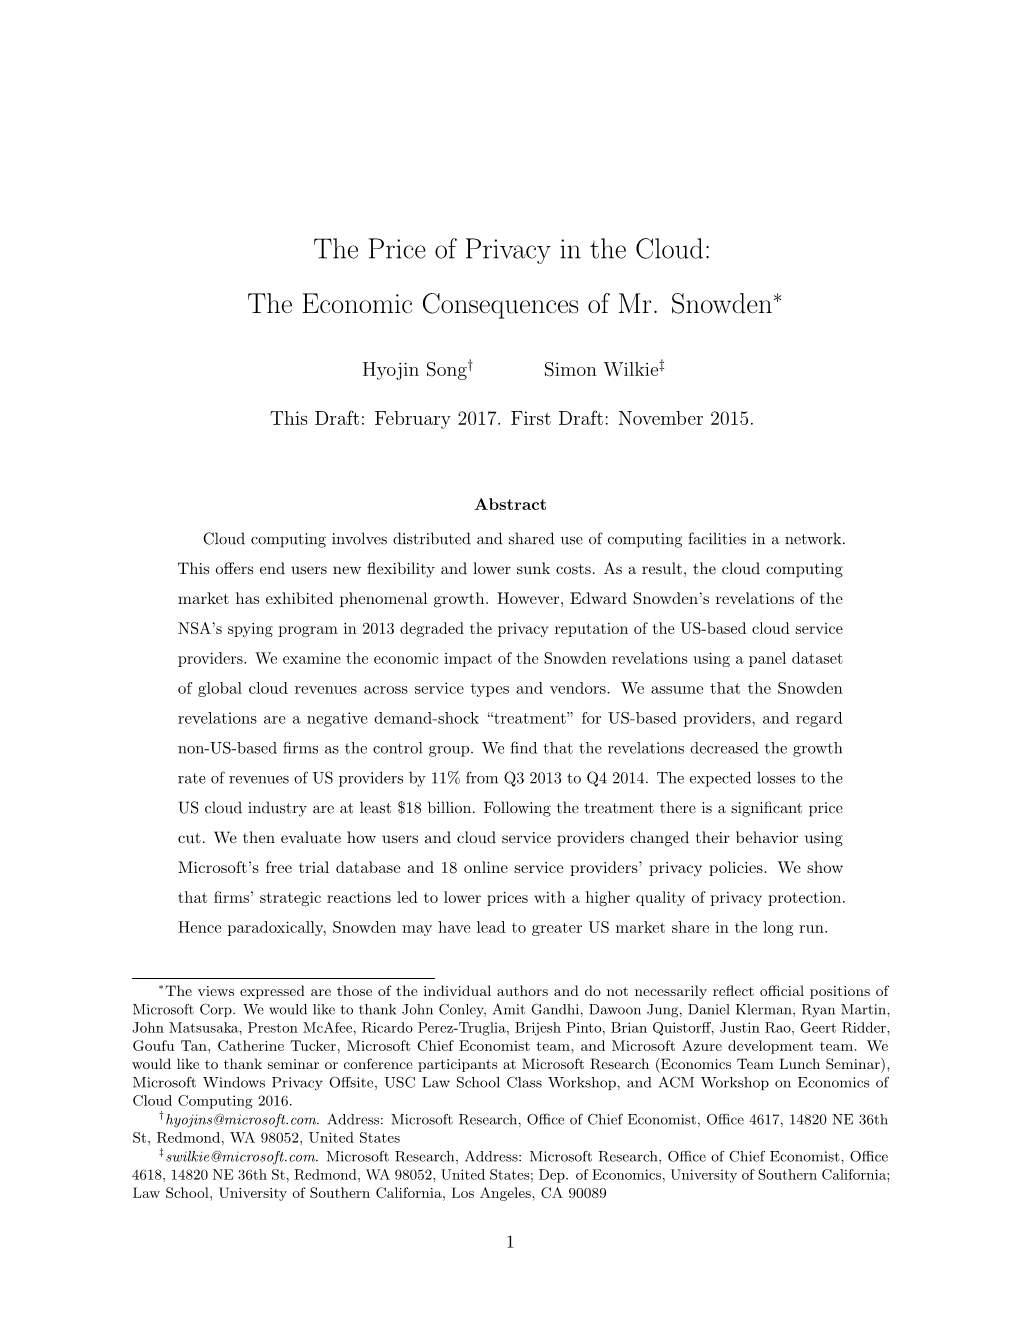 The Price of Privacy in the Cloud: the Economic Consequences of Mr